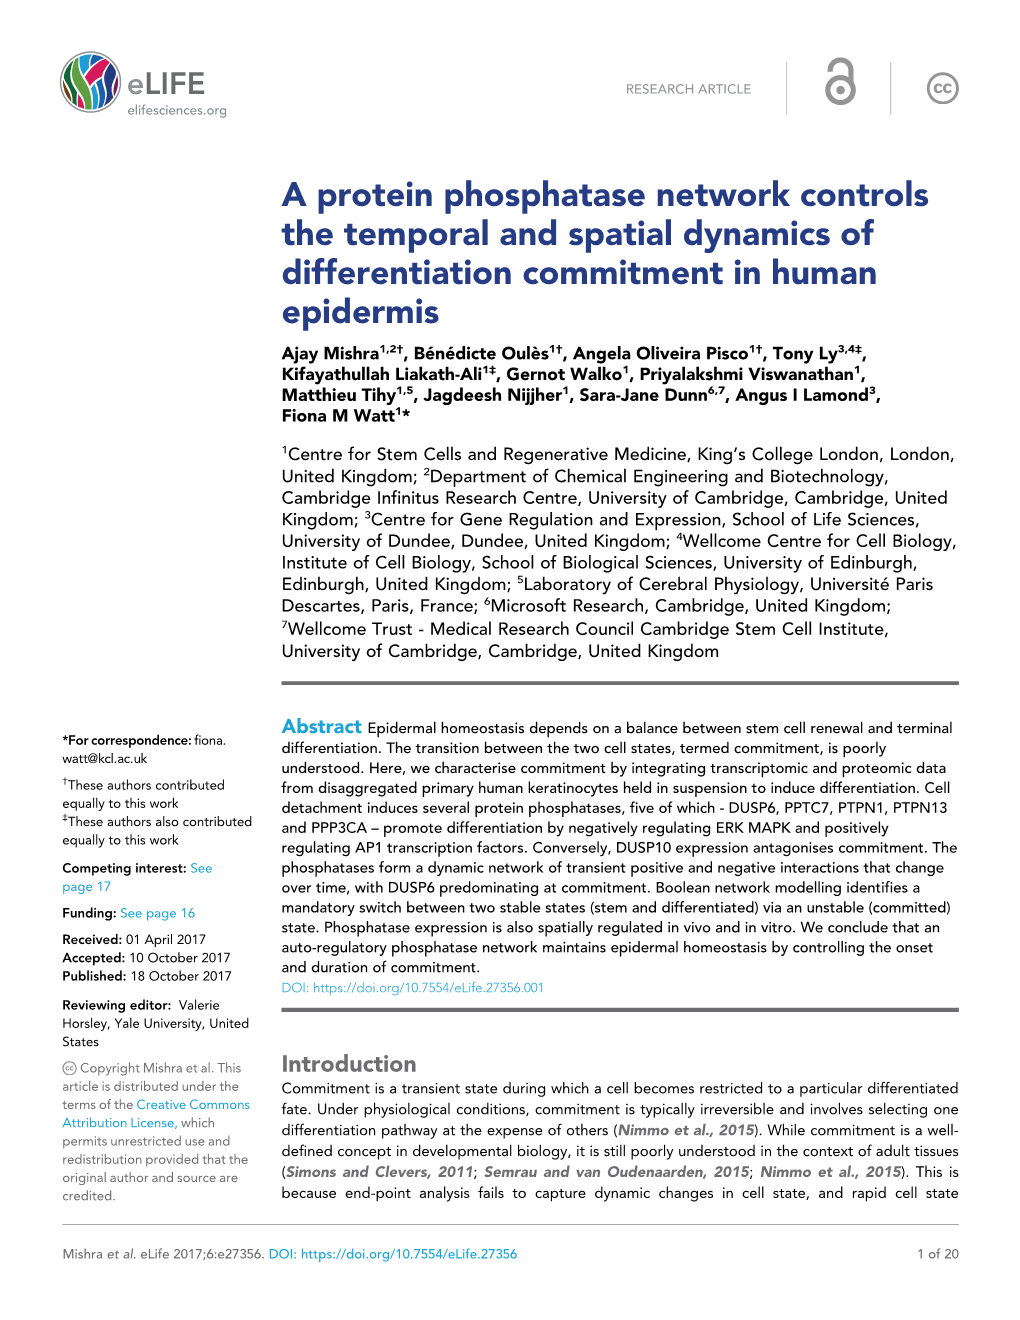 A Protein Phosphatase Network Controls